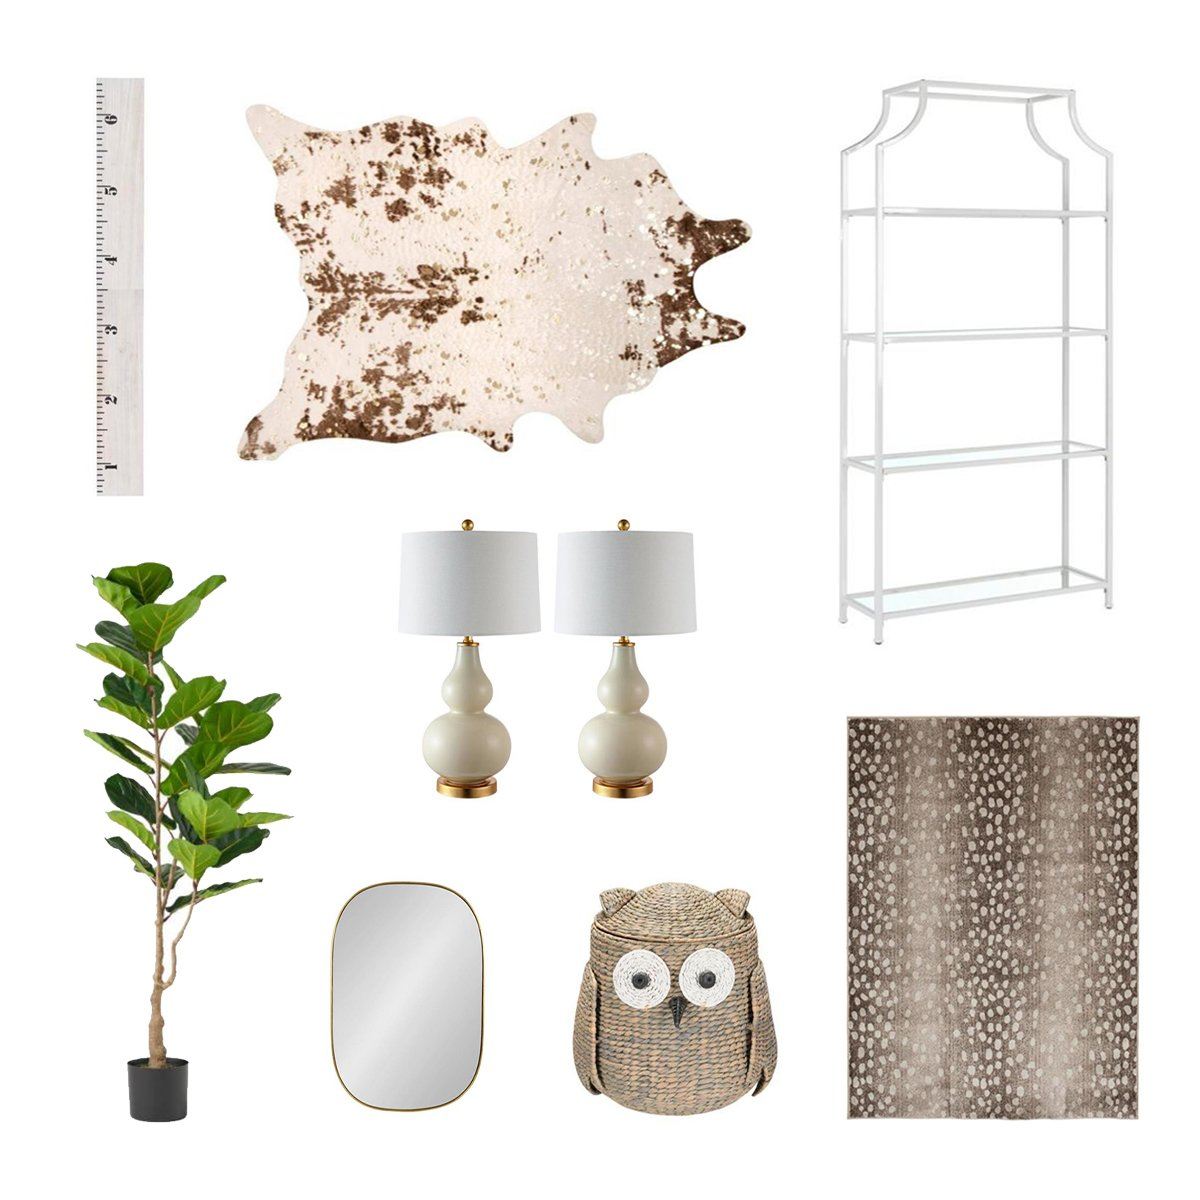 Elegant Décor Finds From The Home Depot for All Around the House